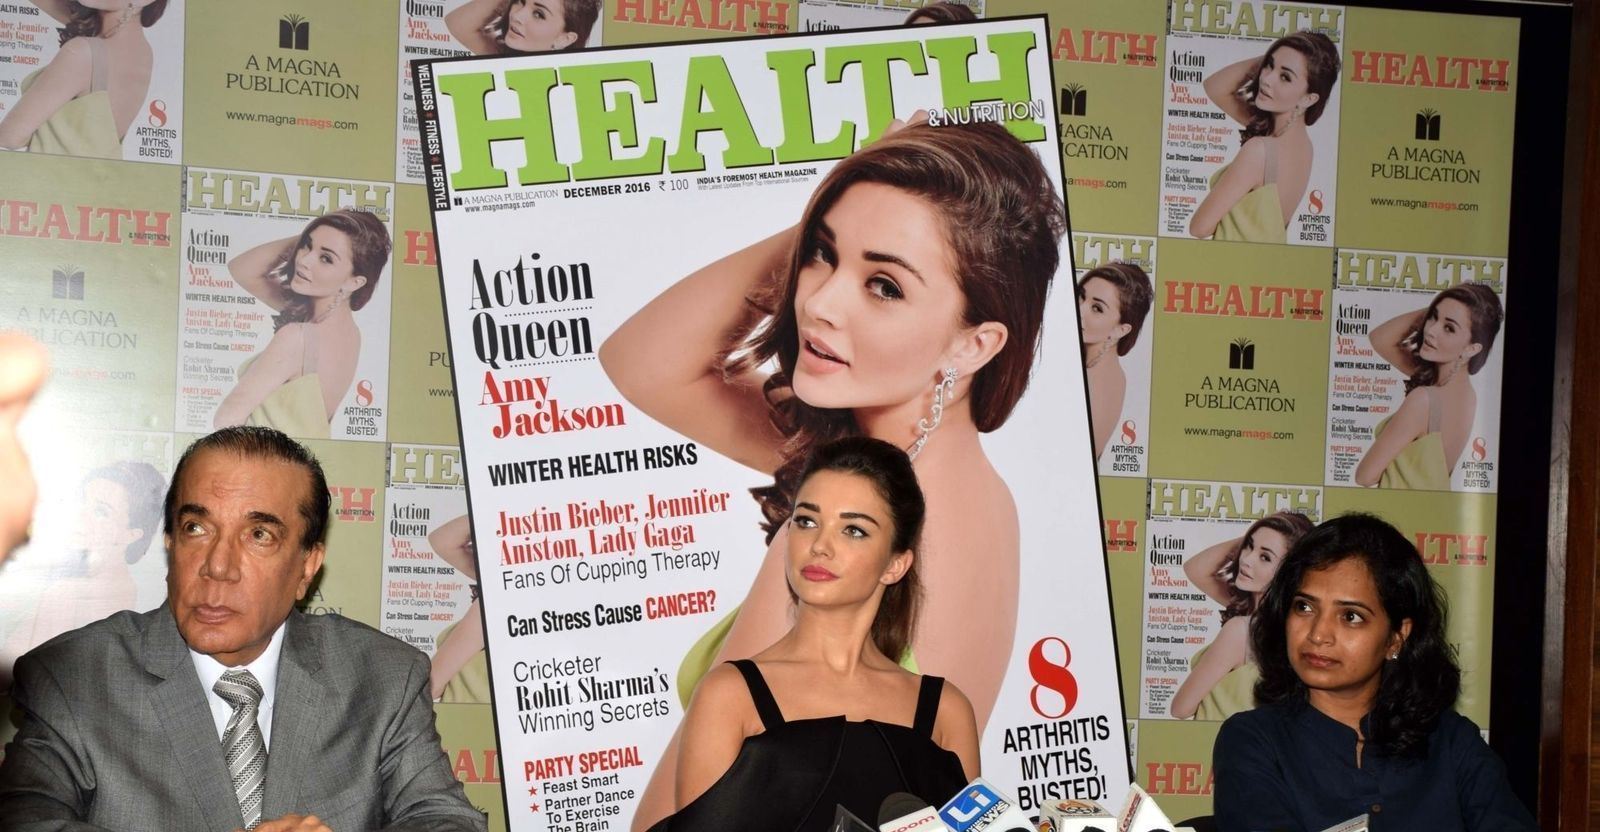 Amy Jackson Looks Gorgeous In Black Dress At The Health & Nutrition Magazine Cover Launch